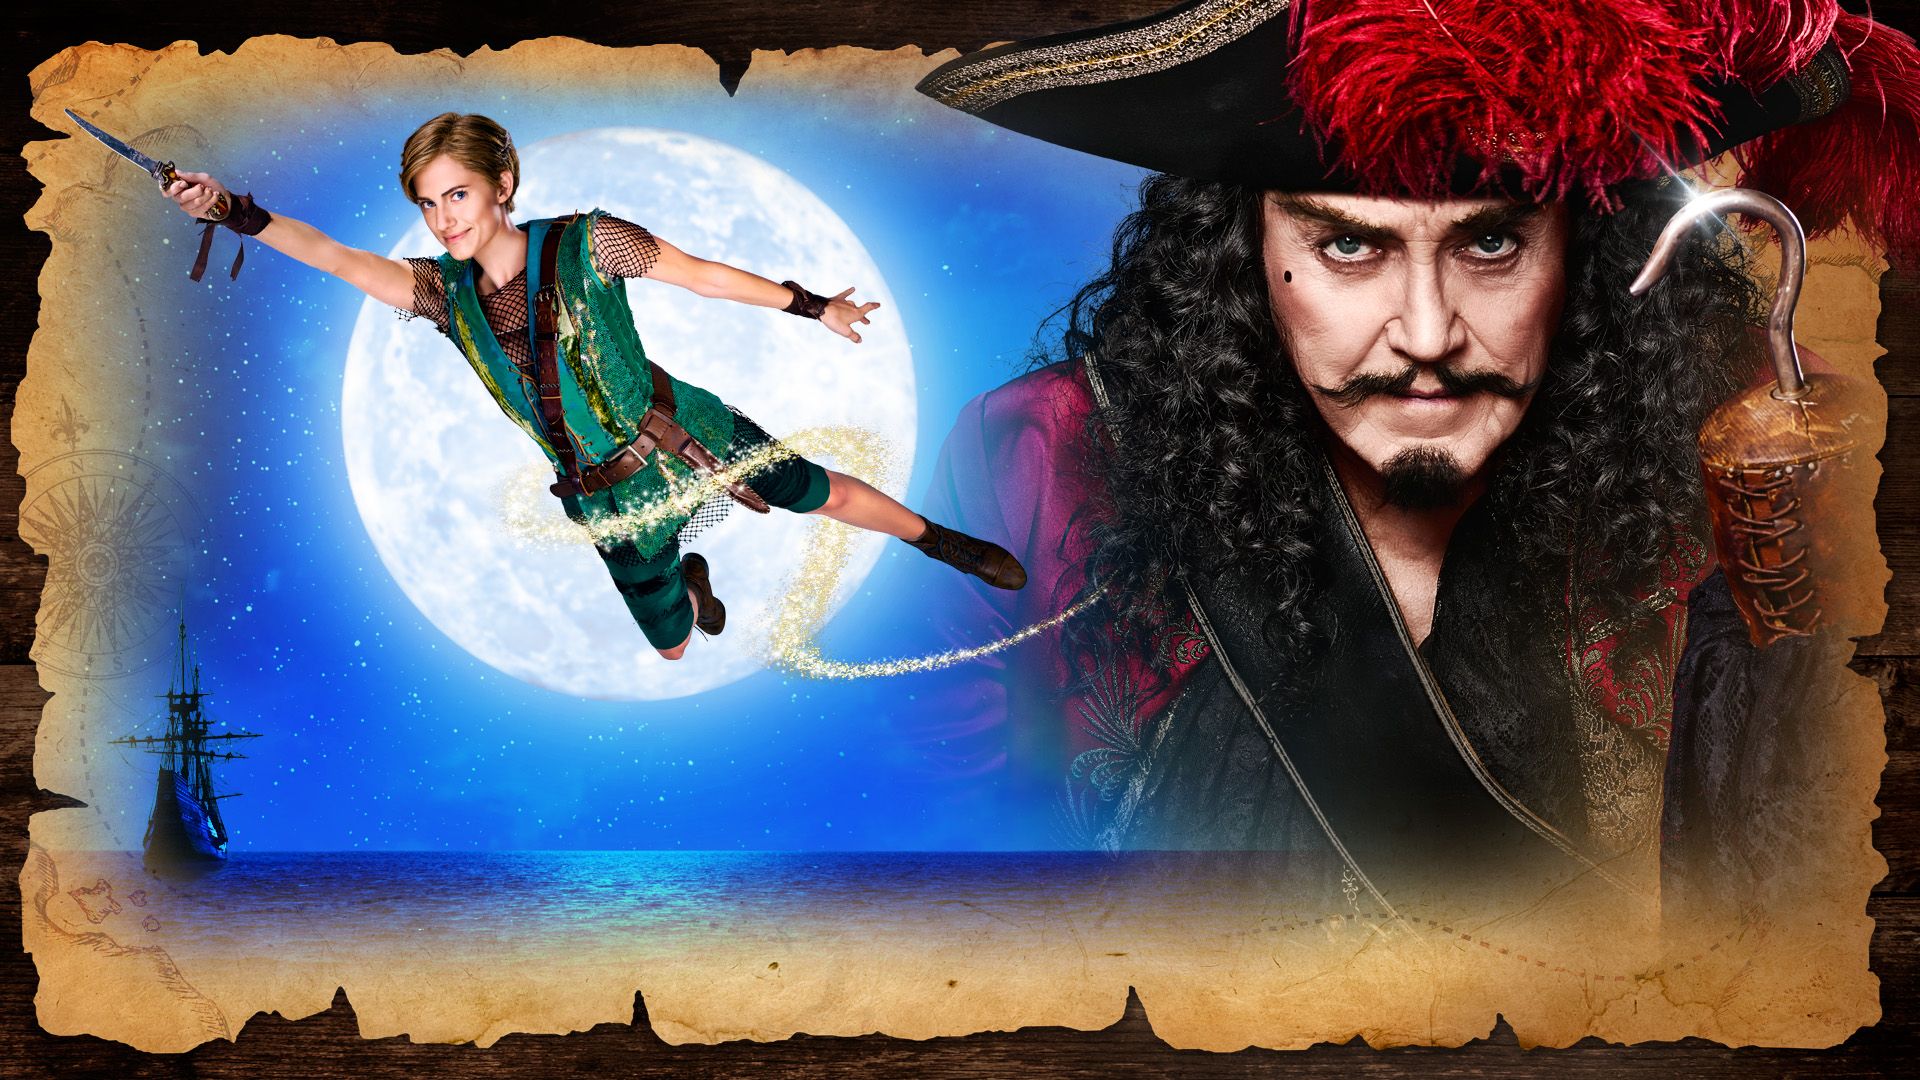 Peter Pan Live! background